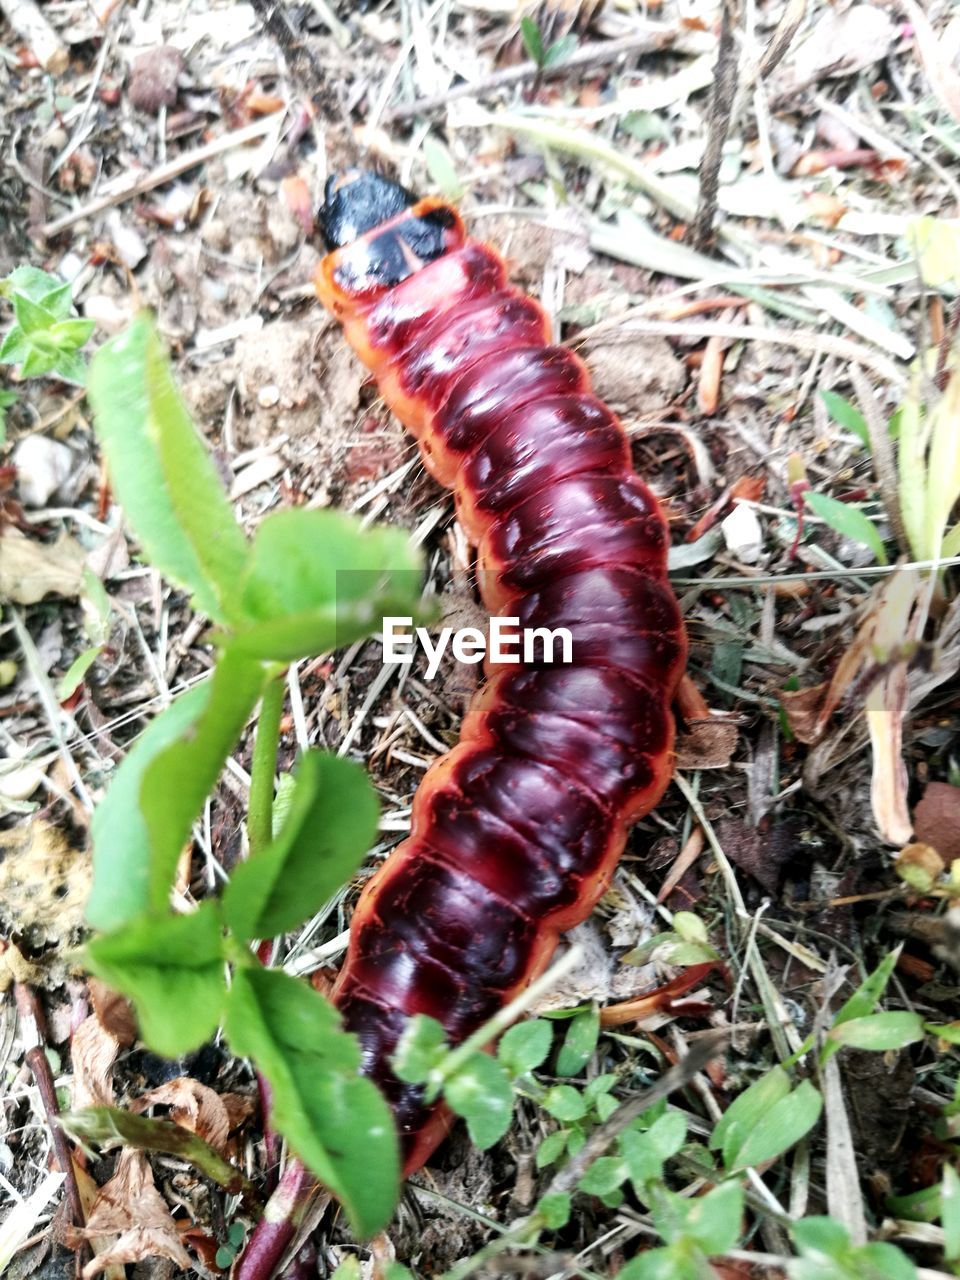 HIGH ANGLE VIEW OF CATERPILLAR ON FIELD